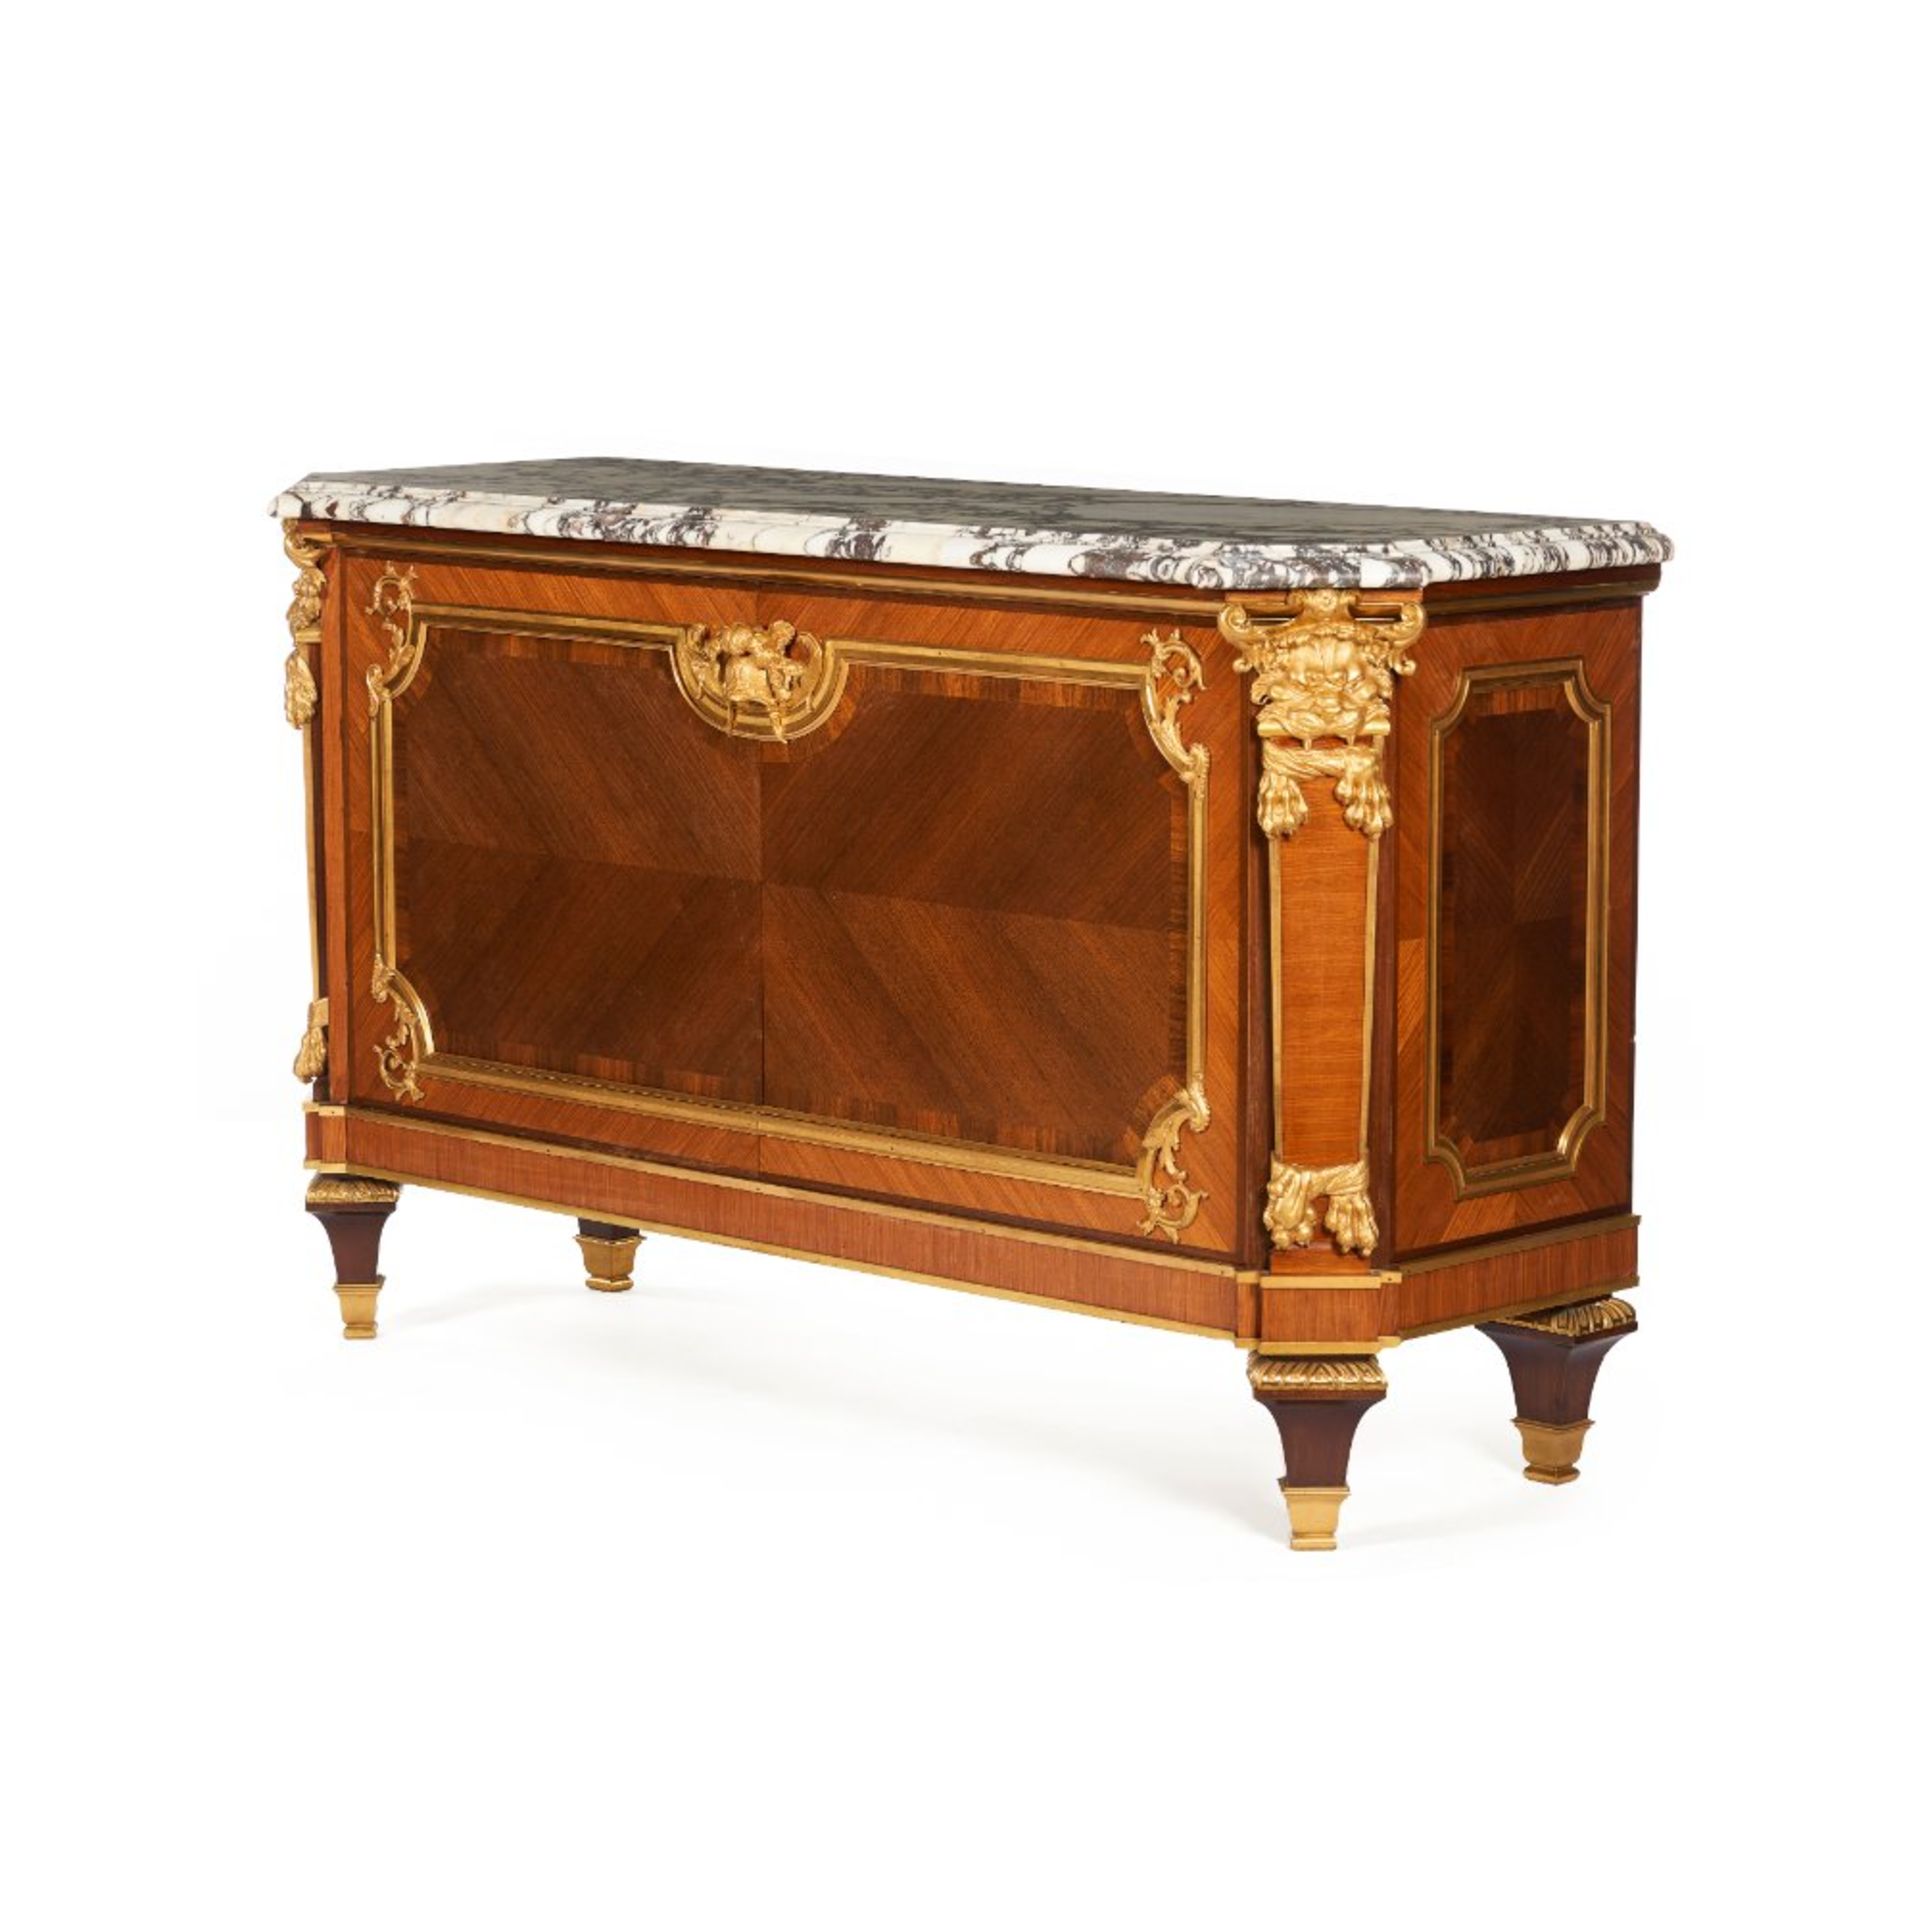 A French "A vanteaux" commode, Attrib. Jansen - Image 2 of 5